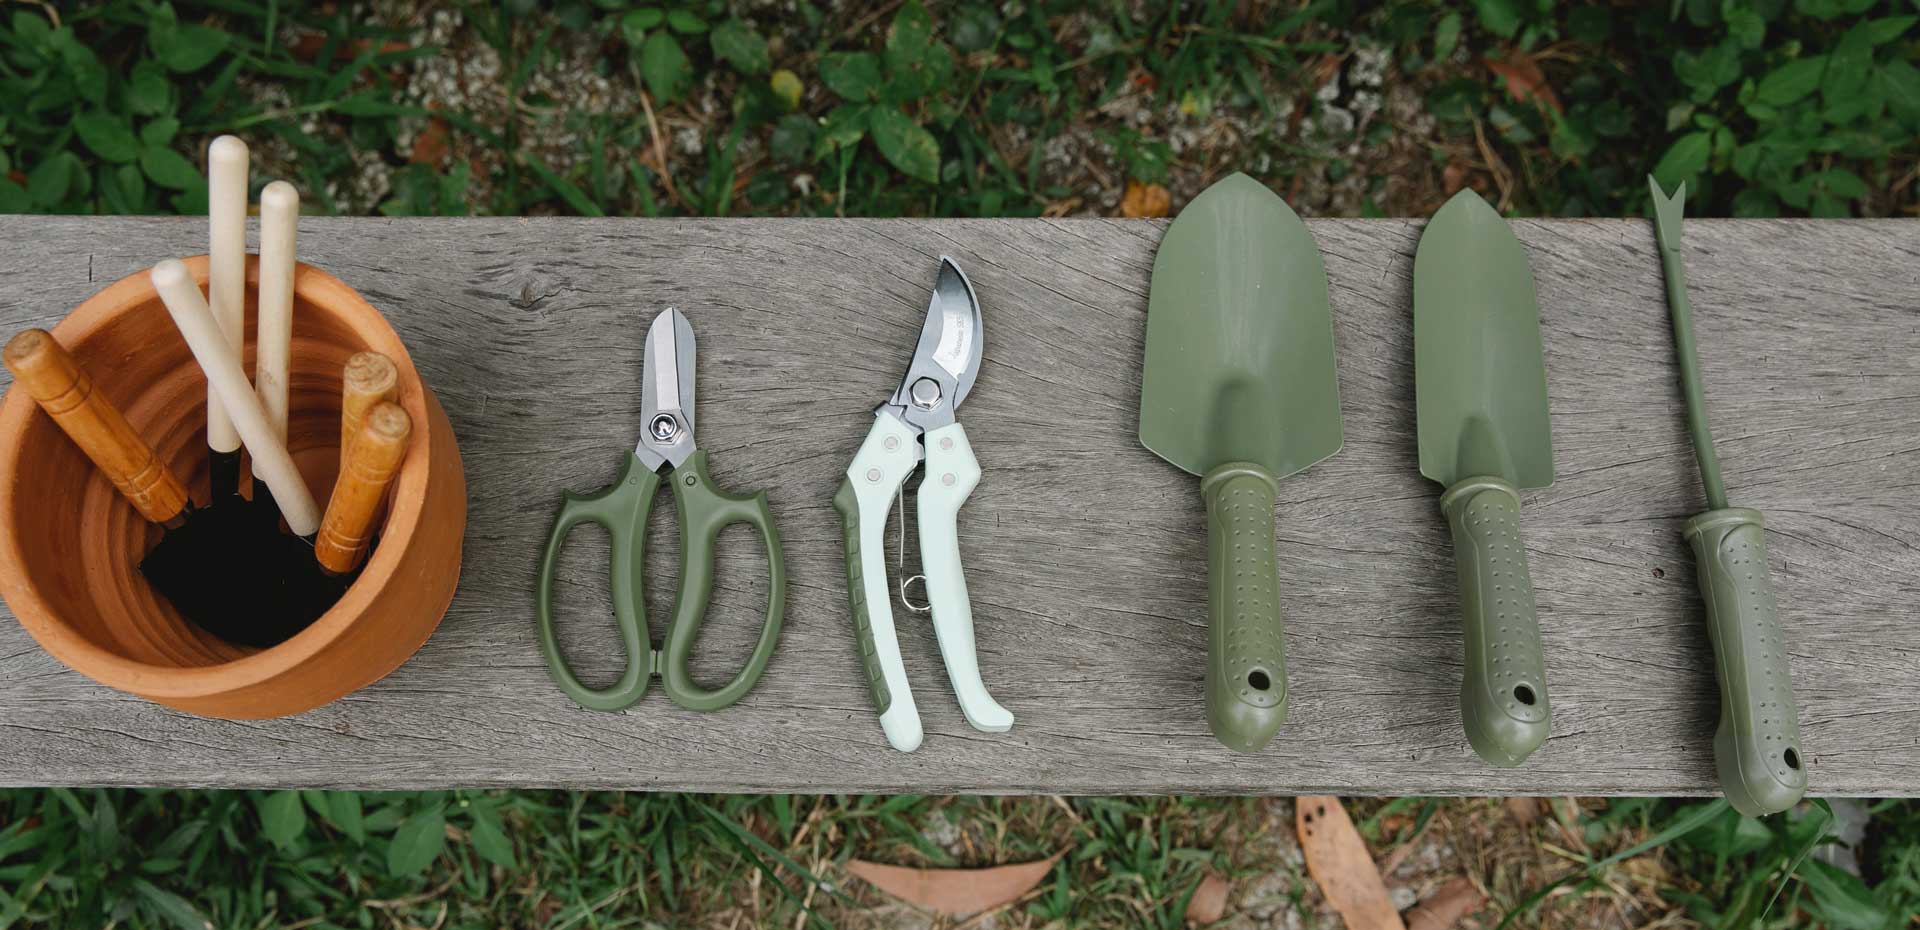 garden tools sitting on a wooden bench